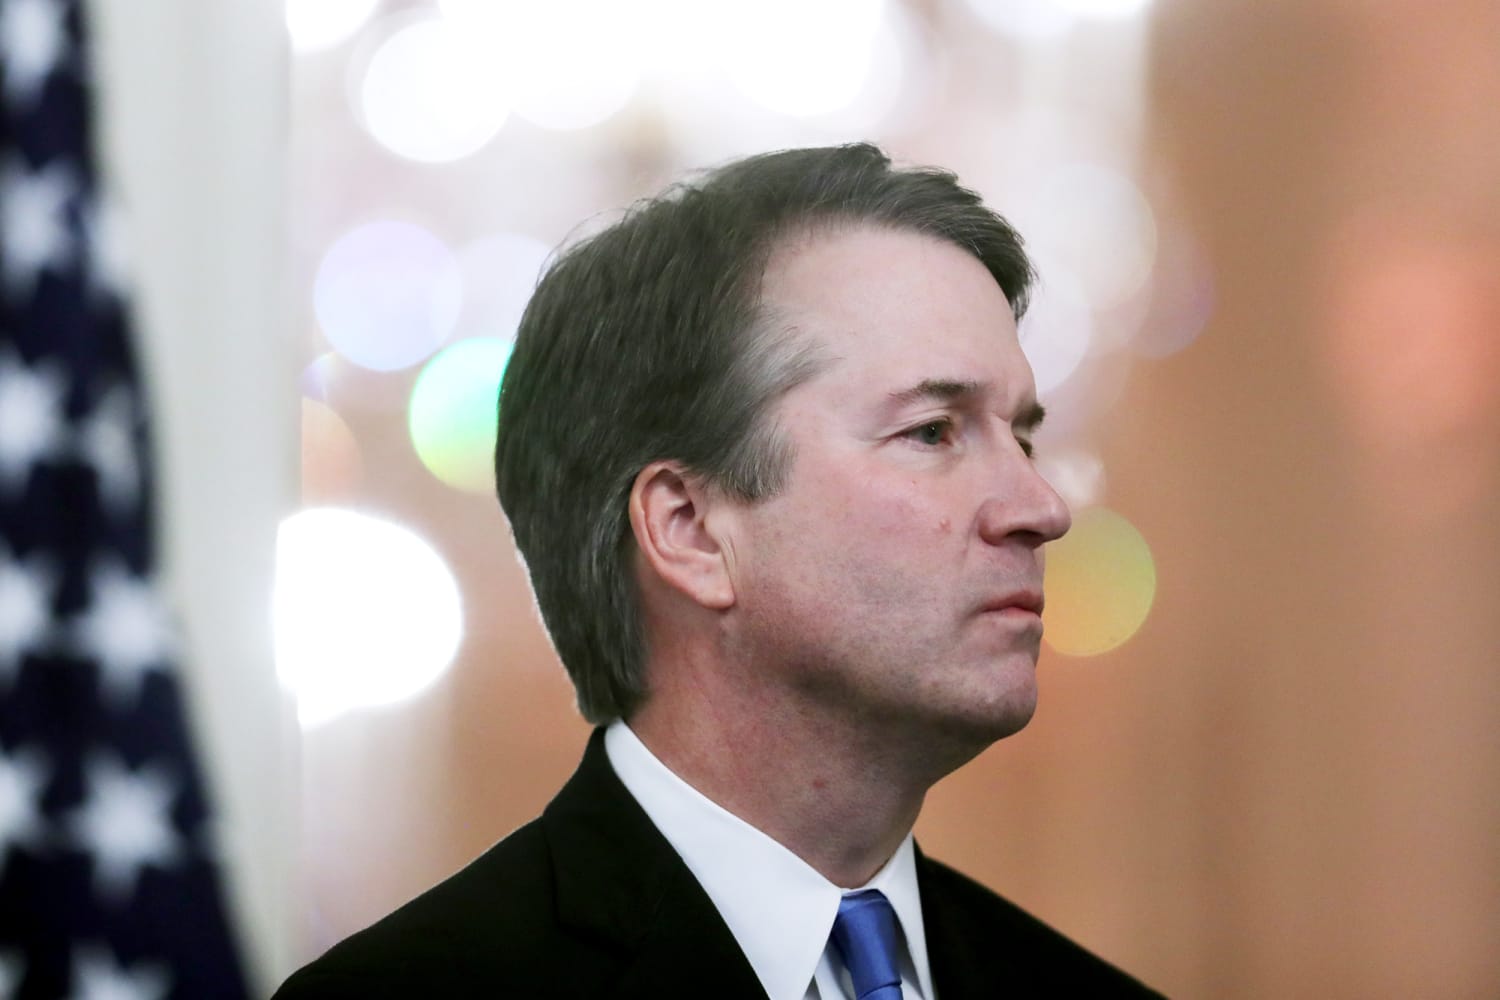 Would-be Kavanaugh attacker texted sister, who told him to call police